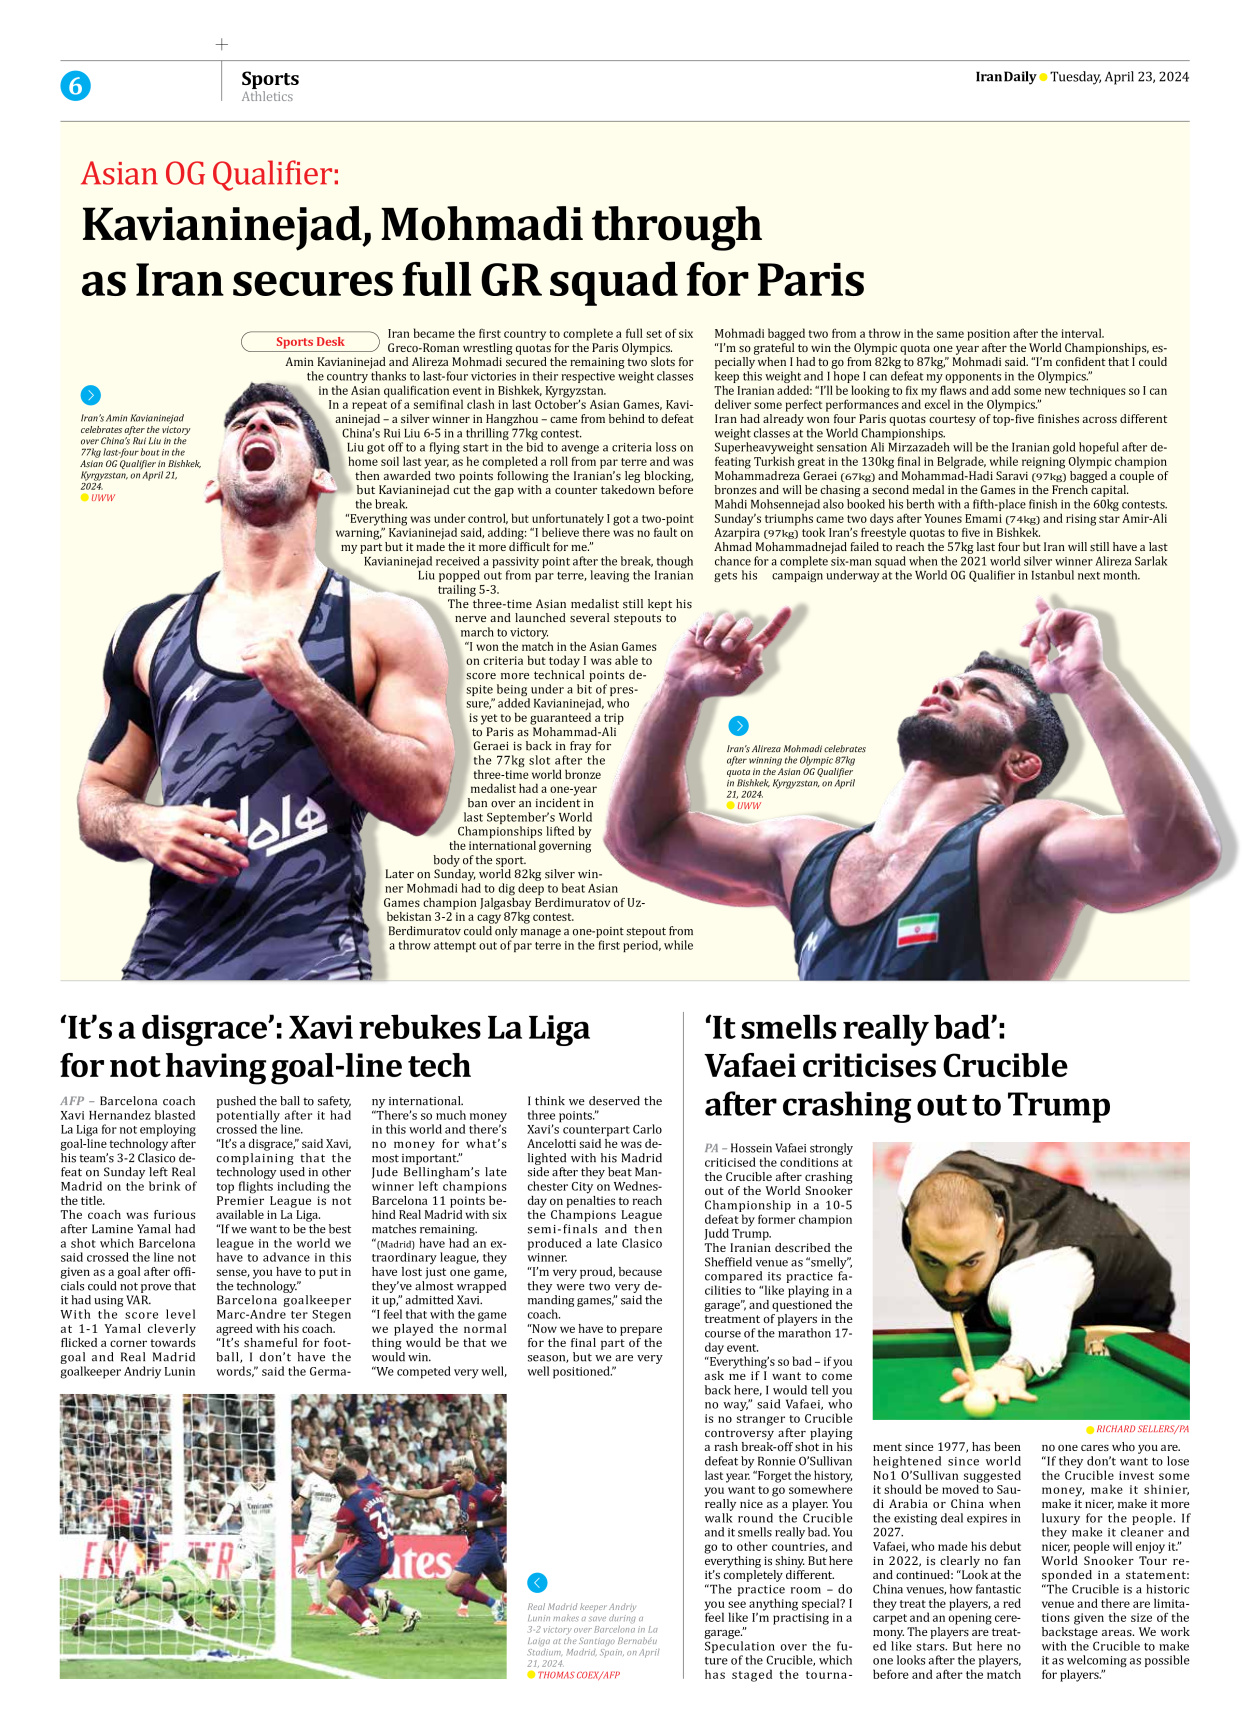 Iran Daily - Number Seven Thousand Five Hundred and Forty - 23 April 2024 - Page 6